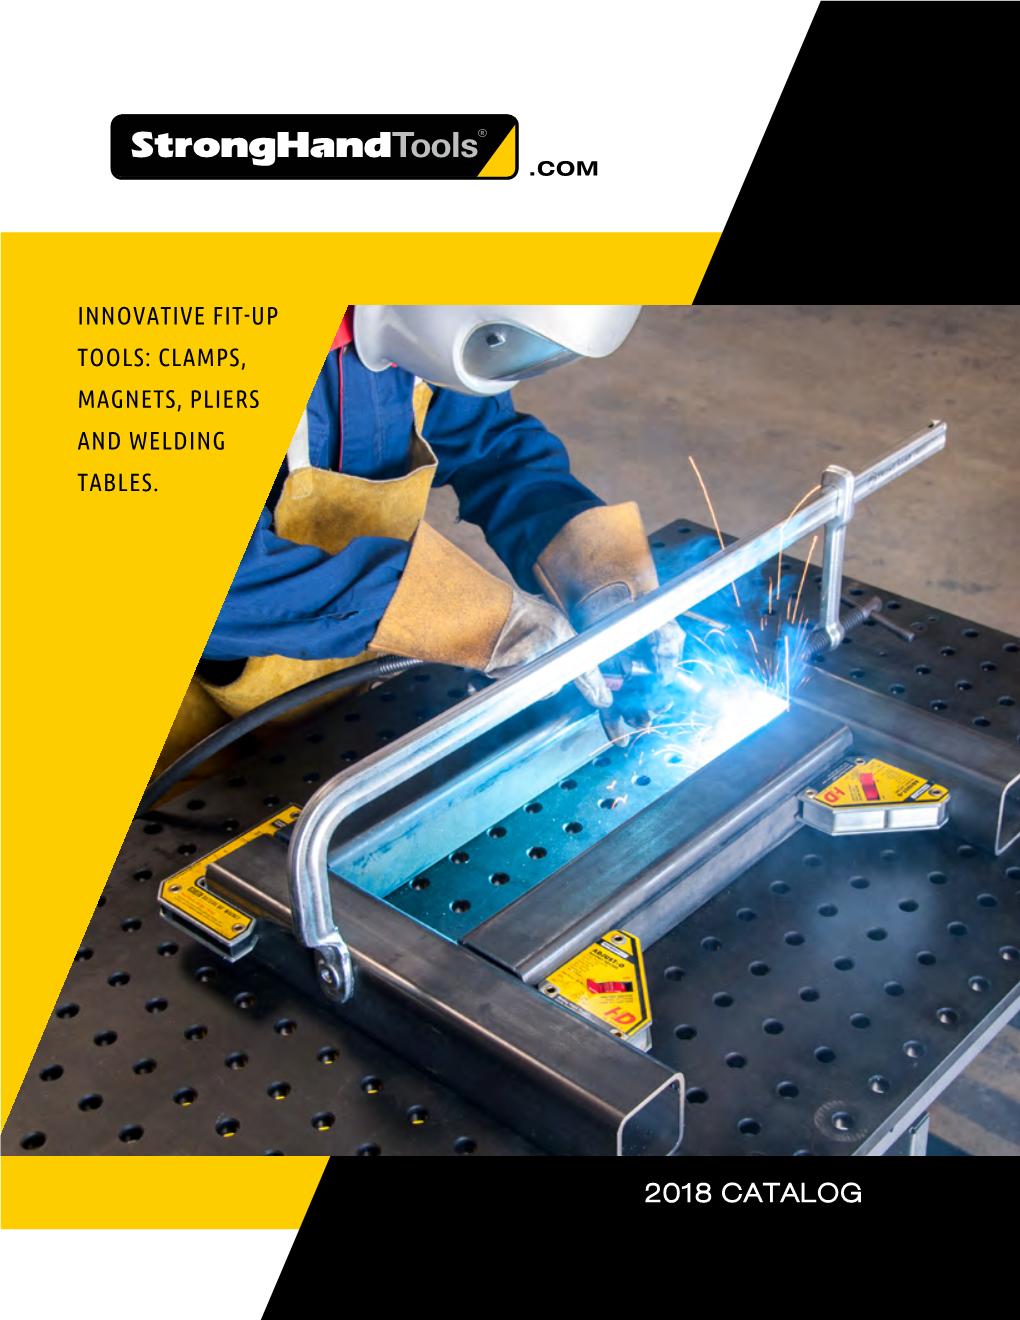 Clamps, Magnets, Pliers and Welding Tables